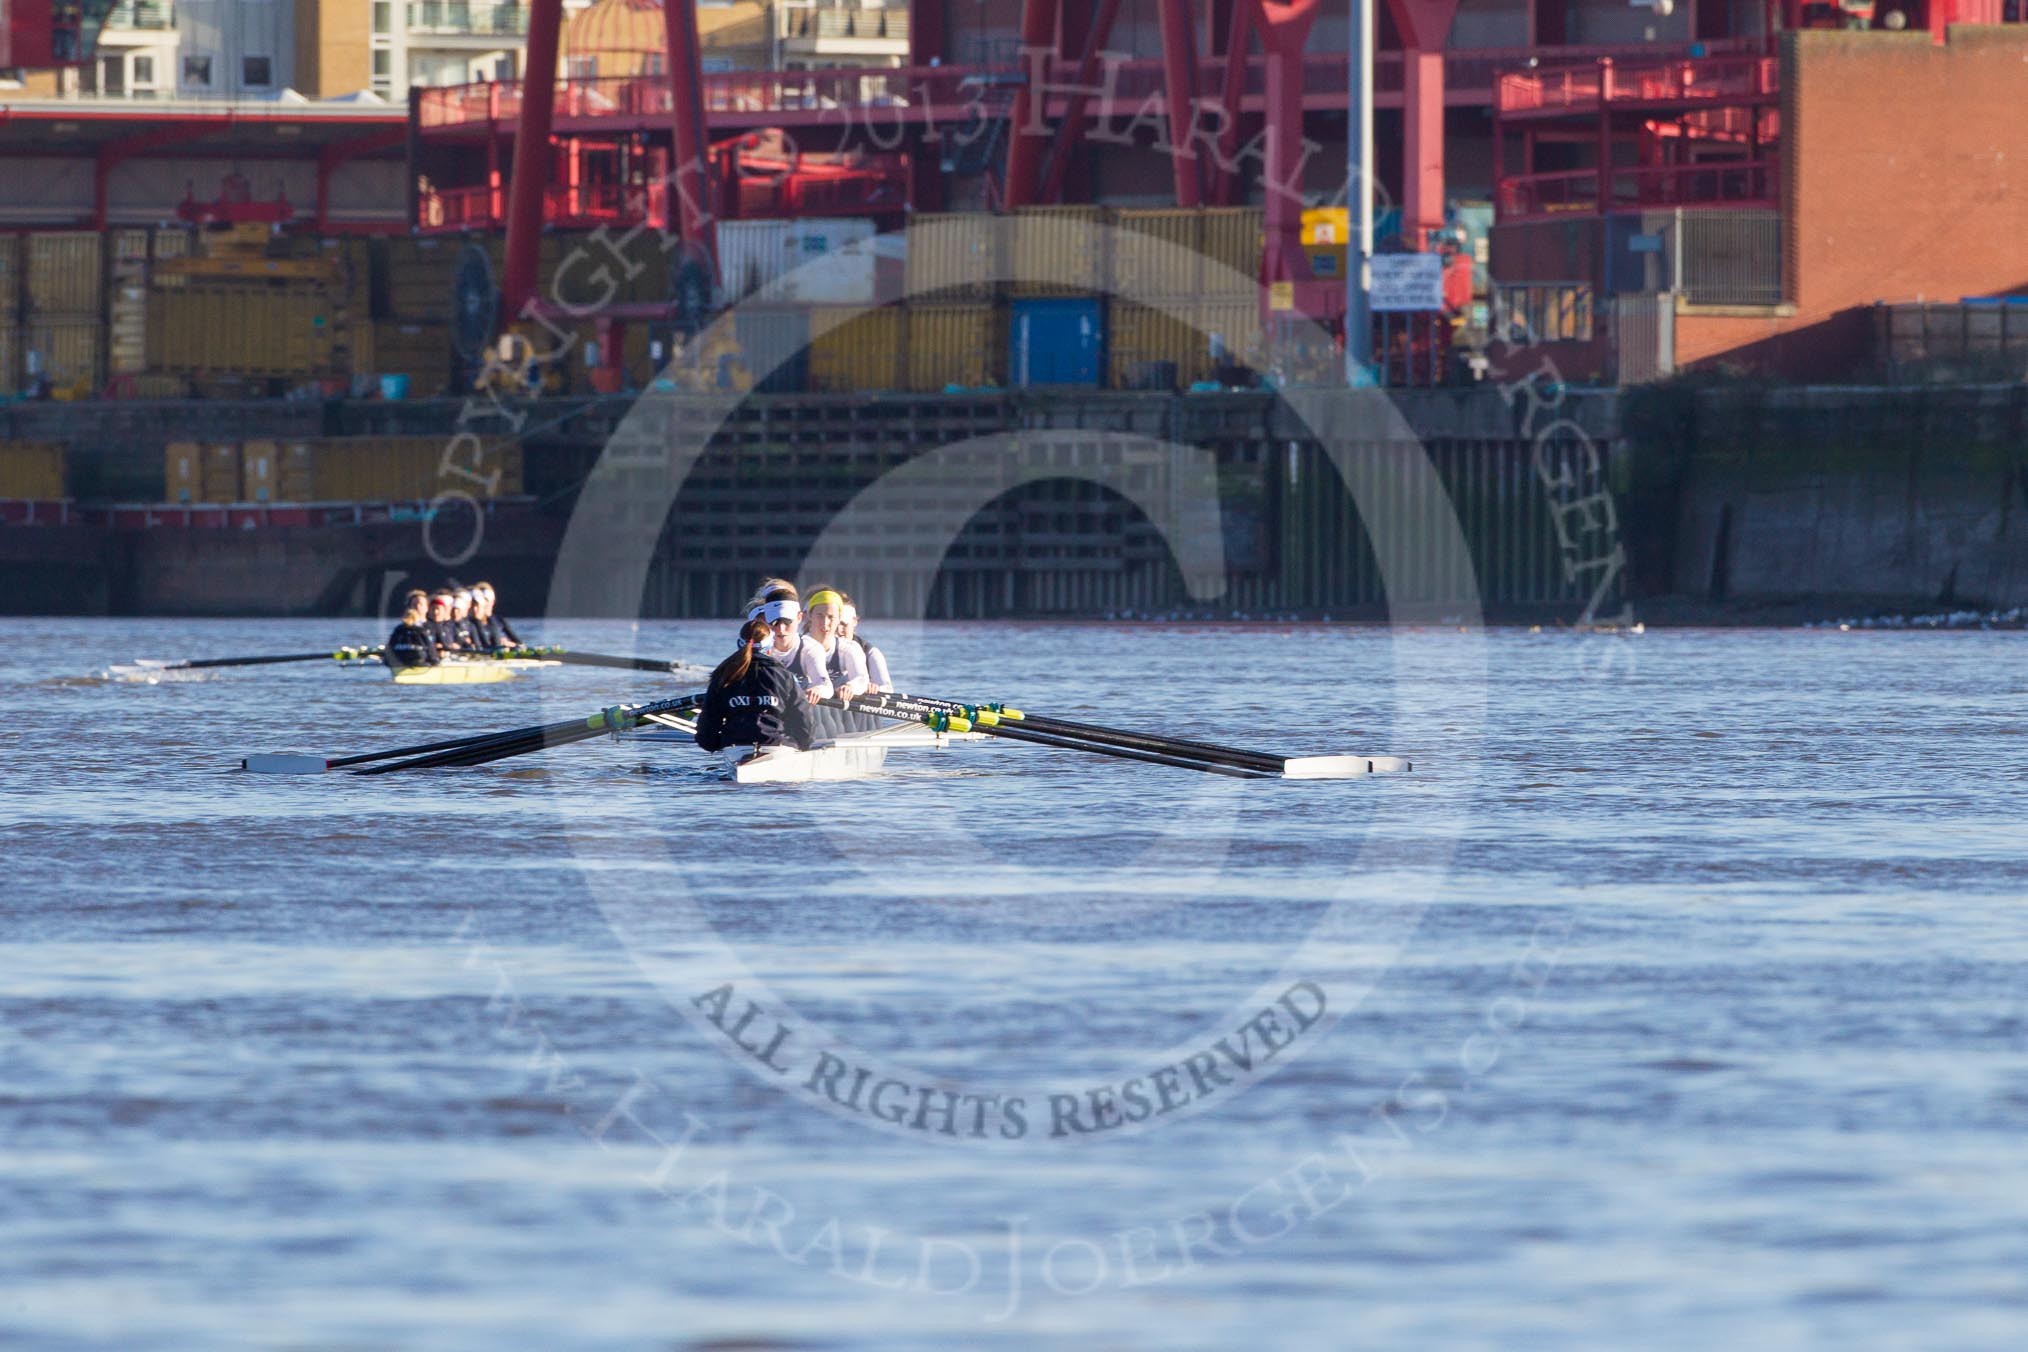 The Boat Race season 2014 - Women's Trial VIIIs (OUWBC, Oxford): The two OUWBC boats - Cleopatra, white, in front, and Boudicca, yellow, behind..
River Thames between Putney Bridge and Mortlake,
London SW15,

United Kingdom,
on 19 December 2013 at 12:23, image #1